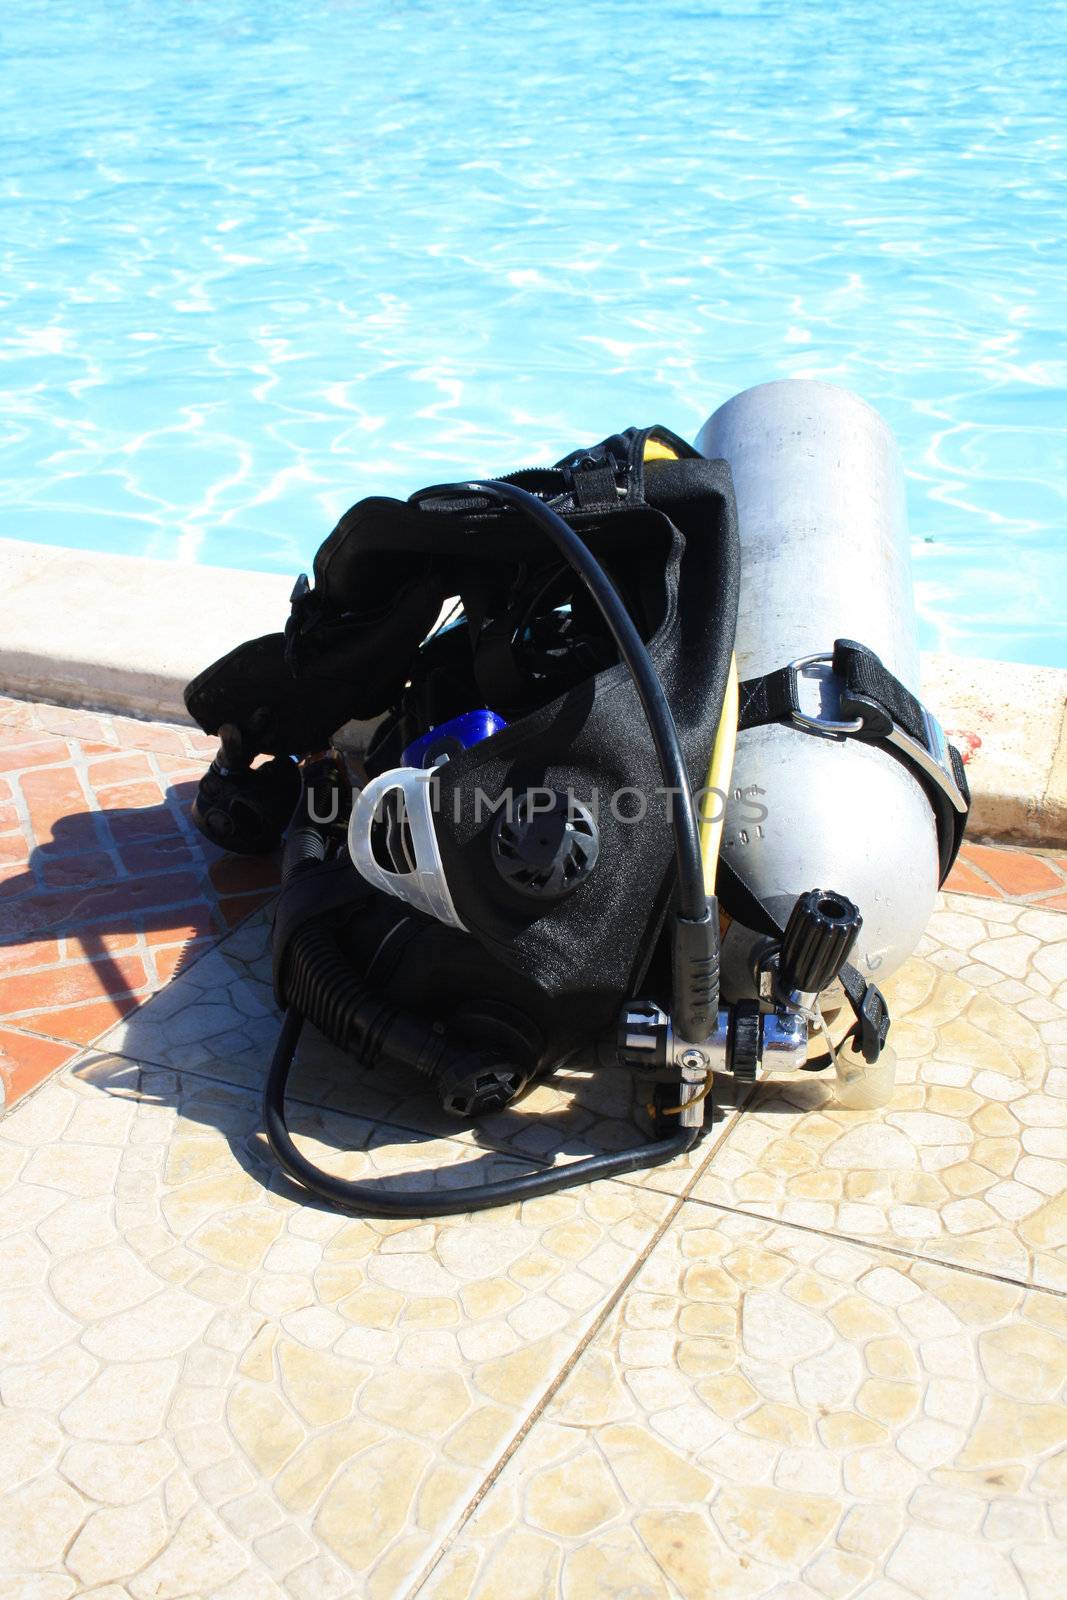 learn to dive in the summer holiday